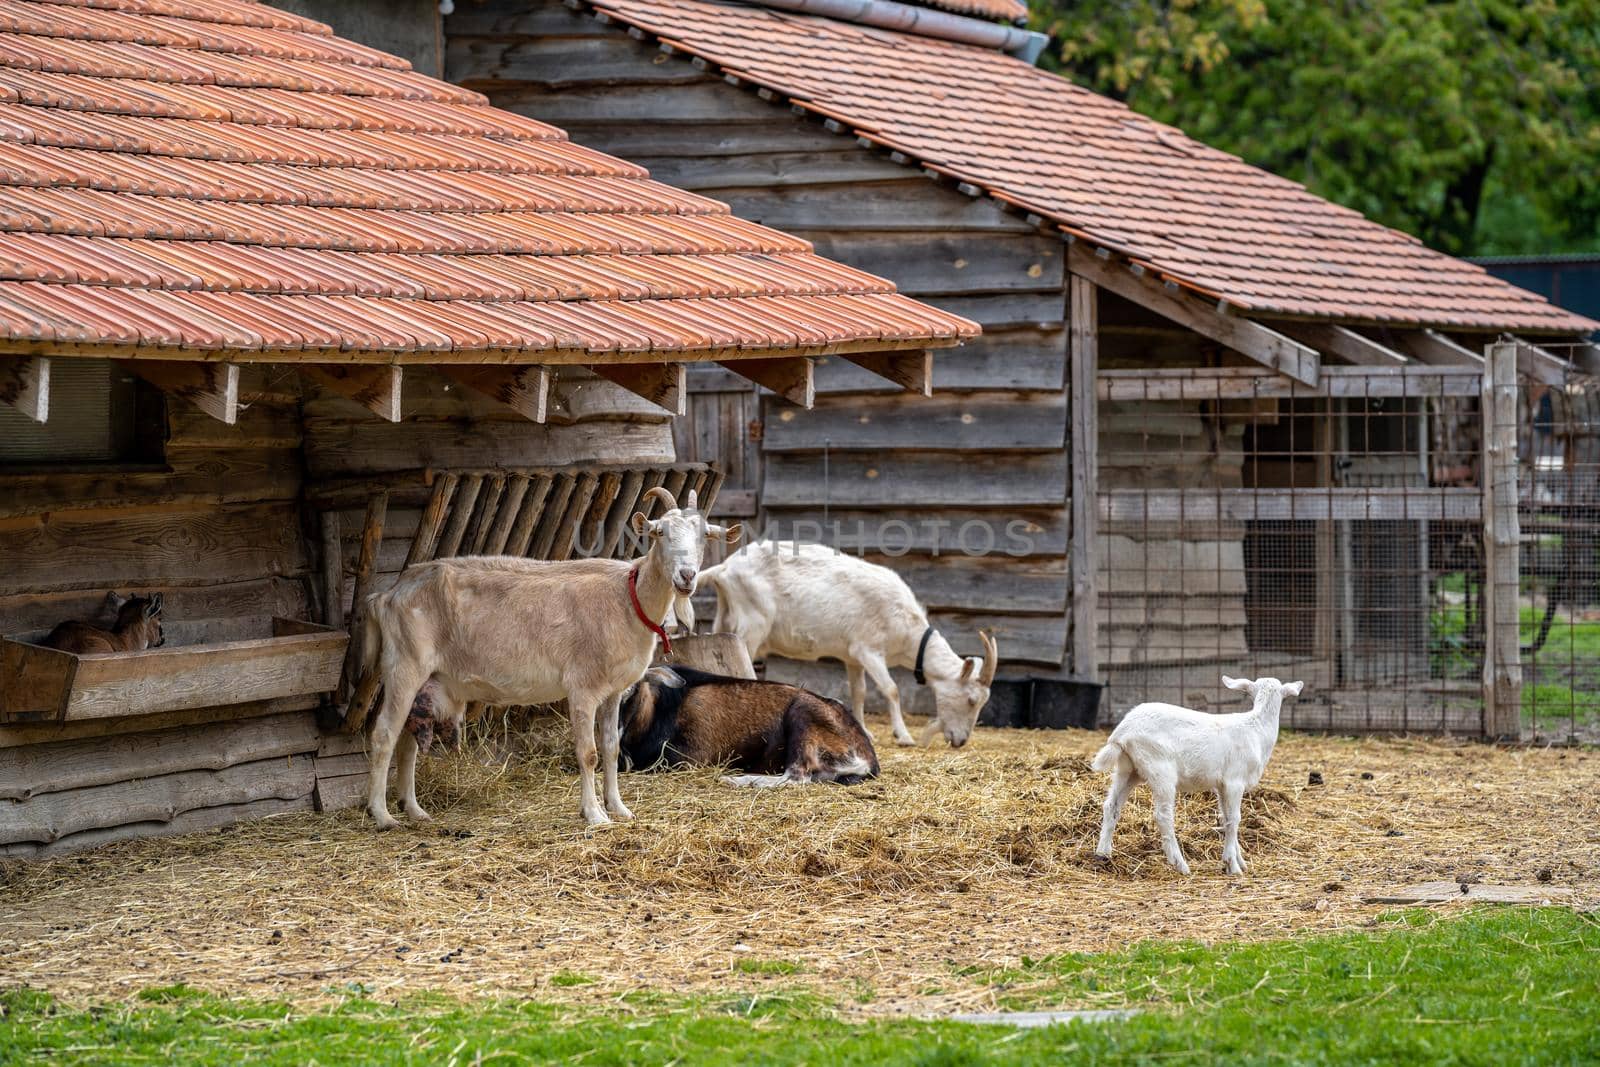 Goats in an outdoor paddock on a farm.